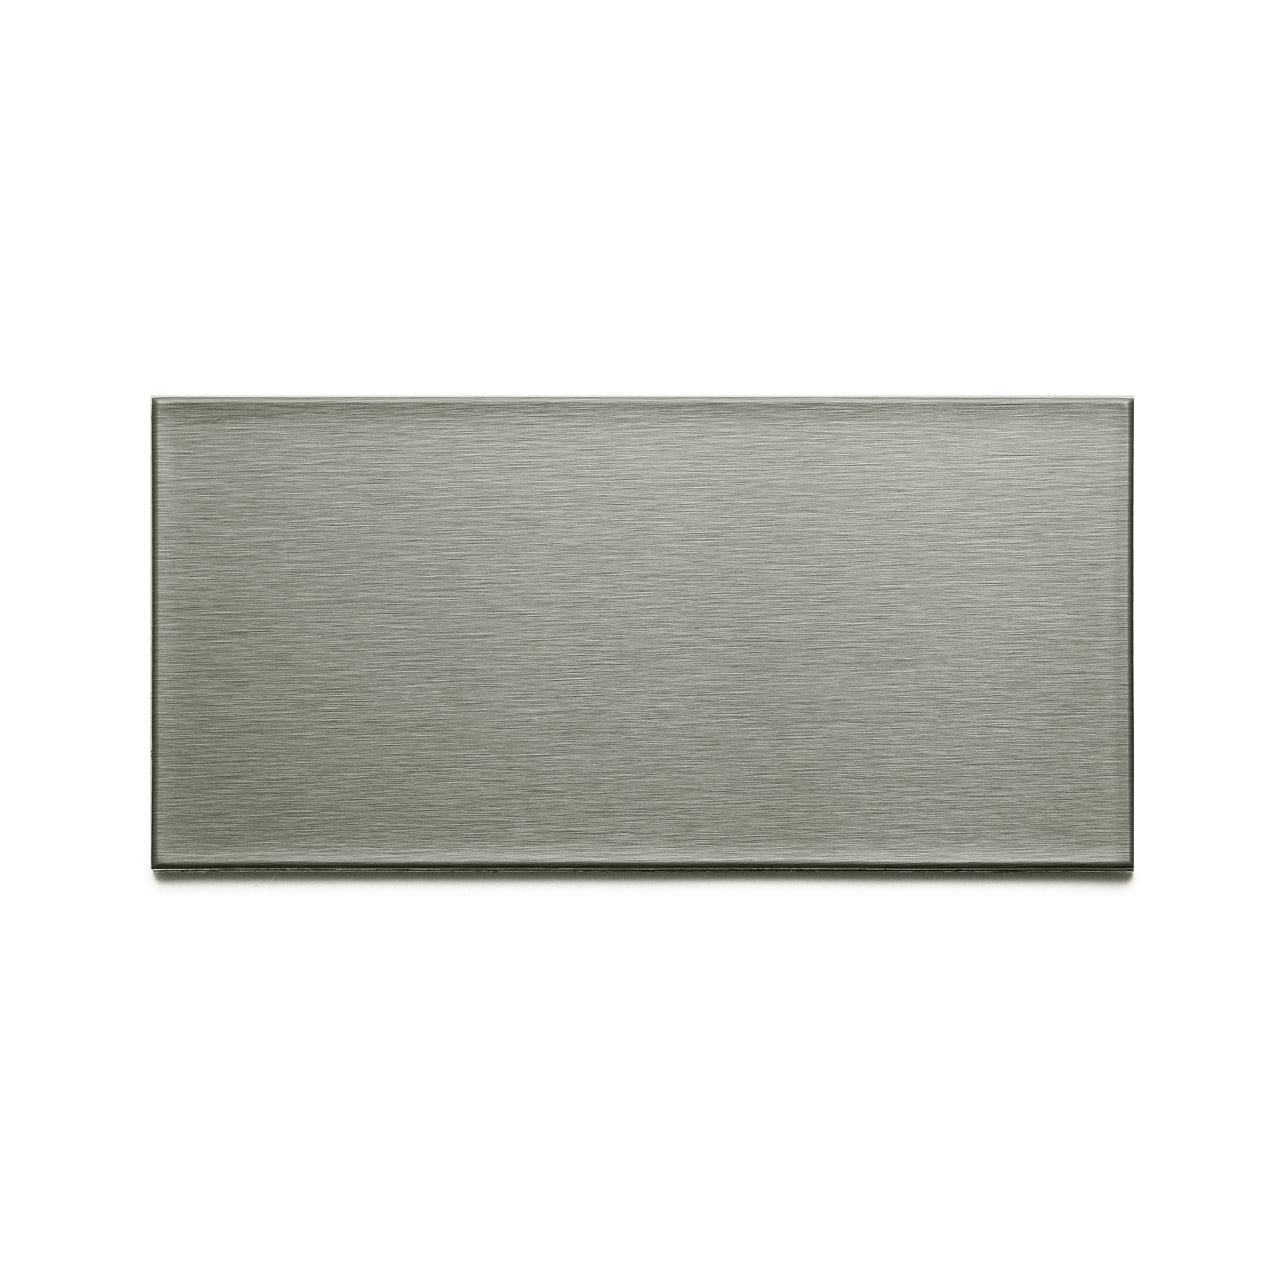 ACP A53-50 Stainless Steel Short Wall Tile 3 x 6 Grain 